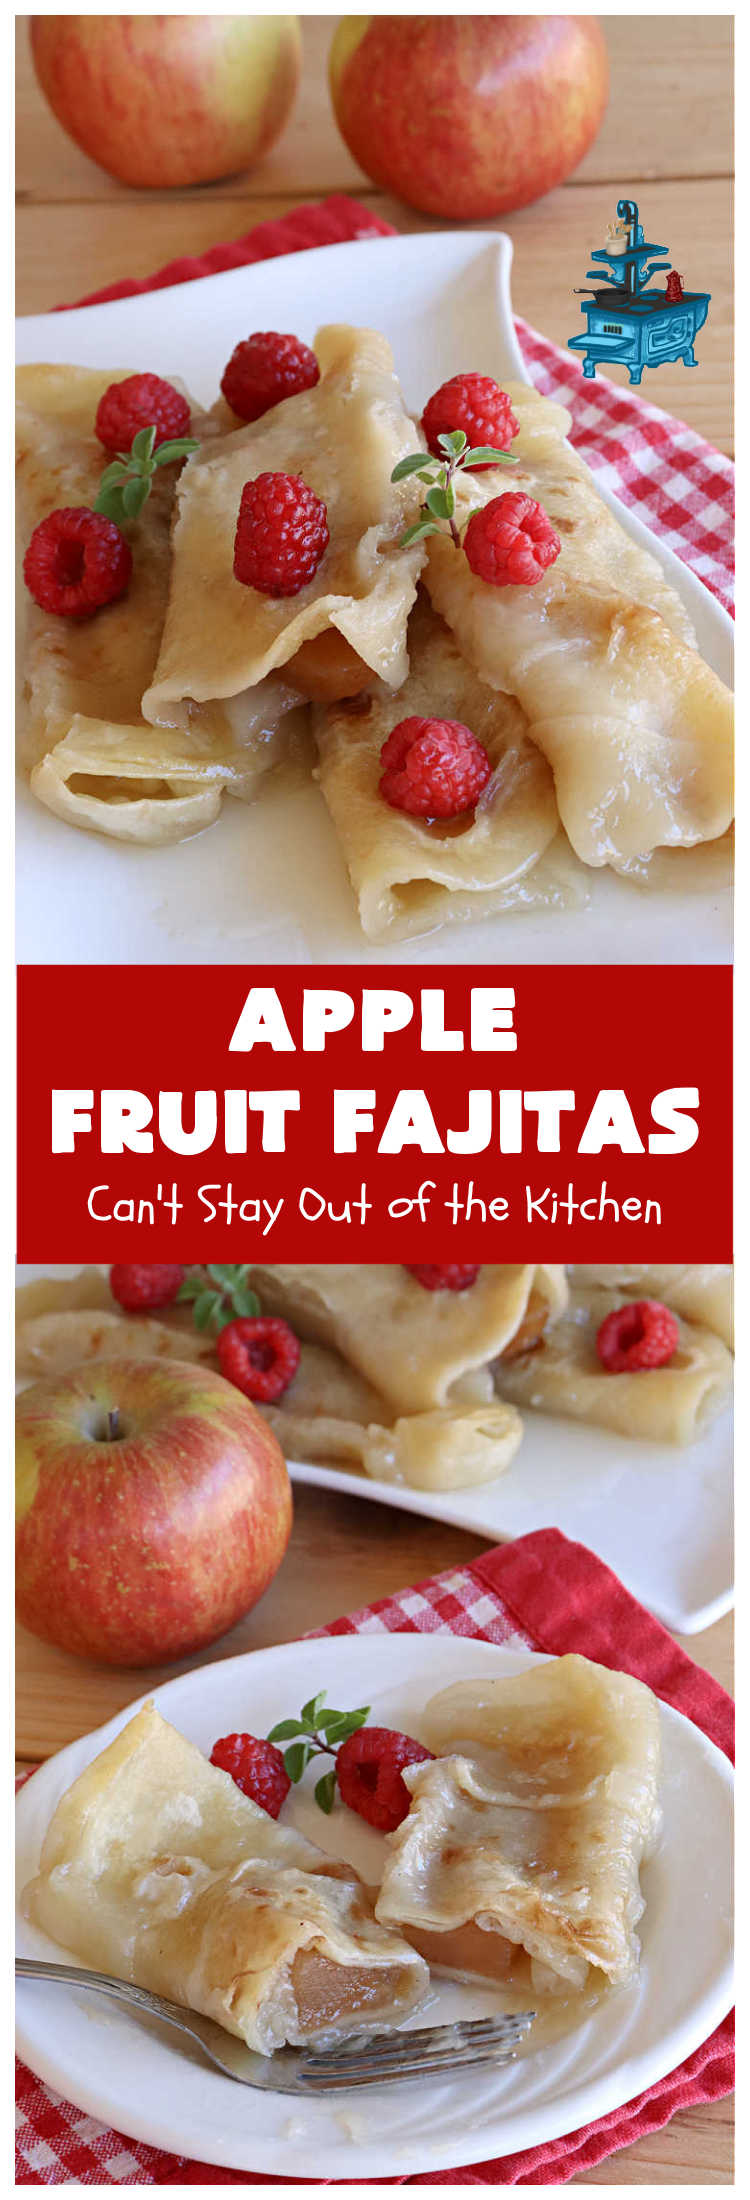 Apple Fruit Fajitas | Can't Stay Out of the Kitchen | these lovely #fruit-flavored #fajitas include #ApplePieFilling & a syrup is poured over top before baking. So  easy to whip up for a quick #dessert. Also good for #breakfast! These use #CaramelApple pie filling making them even better! #apples #CaramelApples #AppleFruitFajitas #AppleDessert